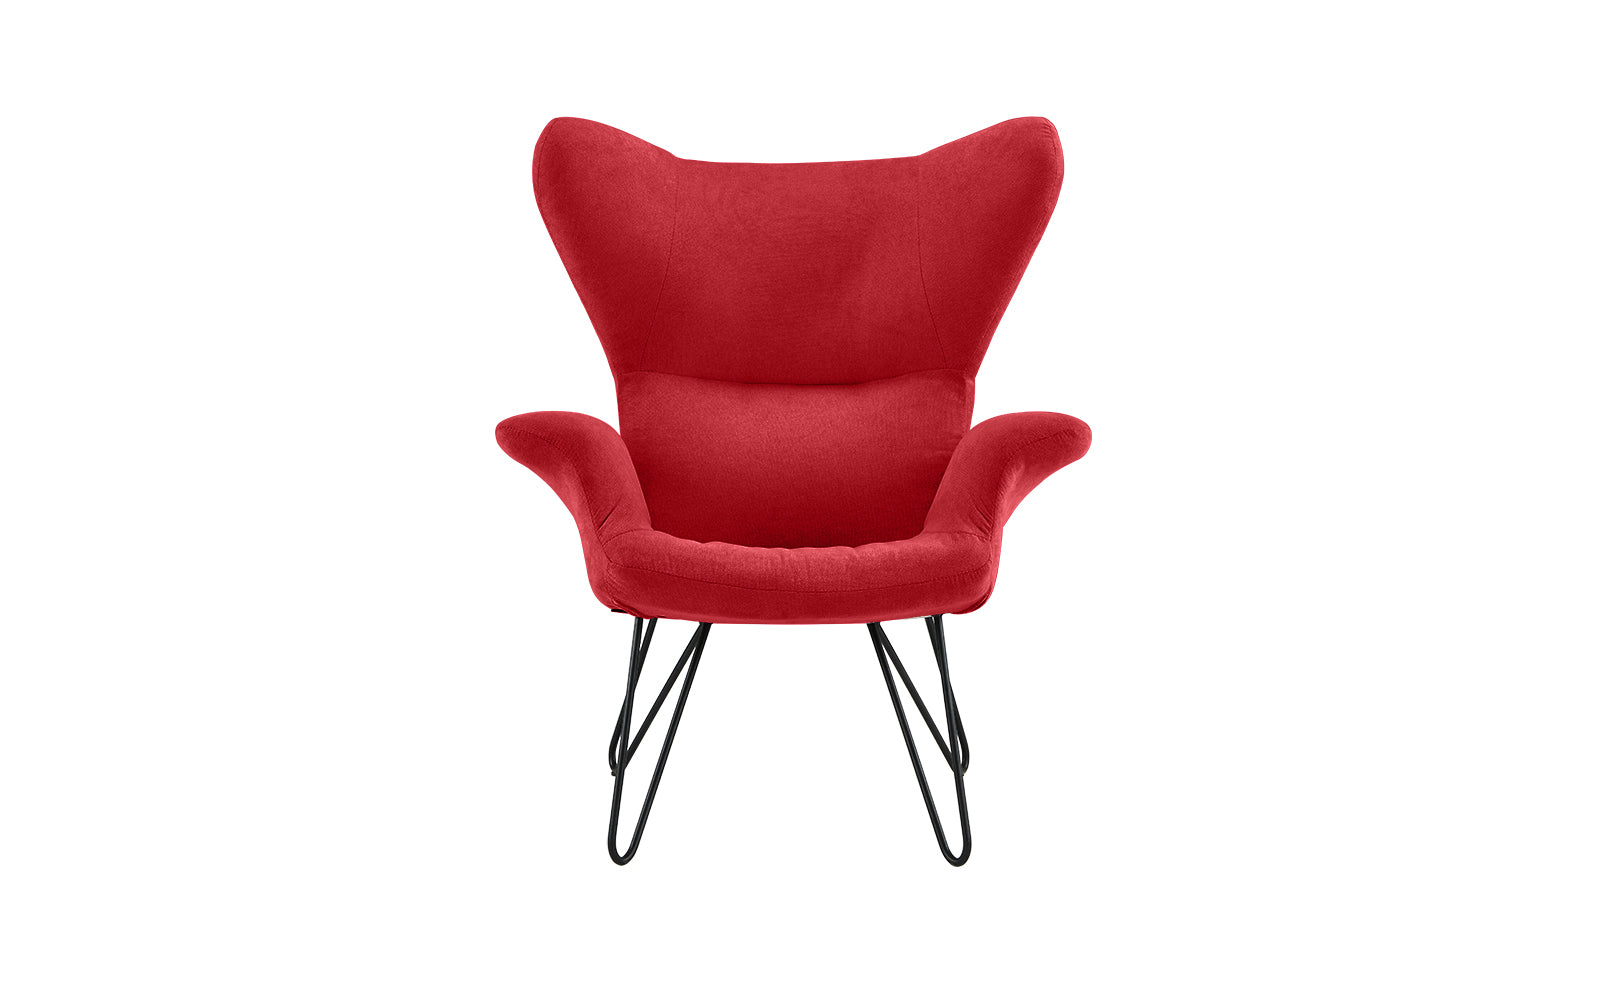 ARM47-FB-RED Leyla Contemporary Armchair with Metal Infinity Pi sku ARM47-FB-RED